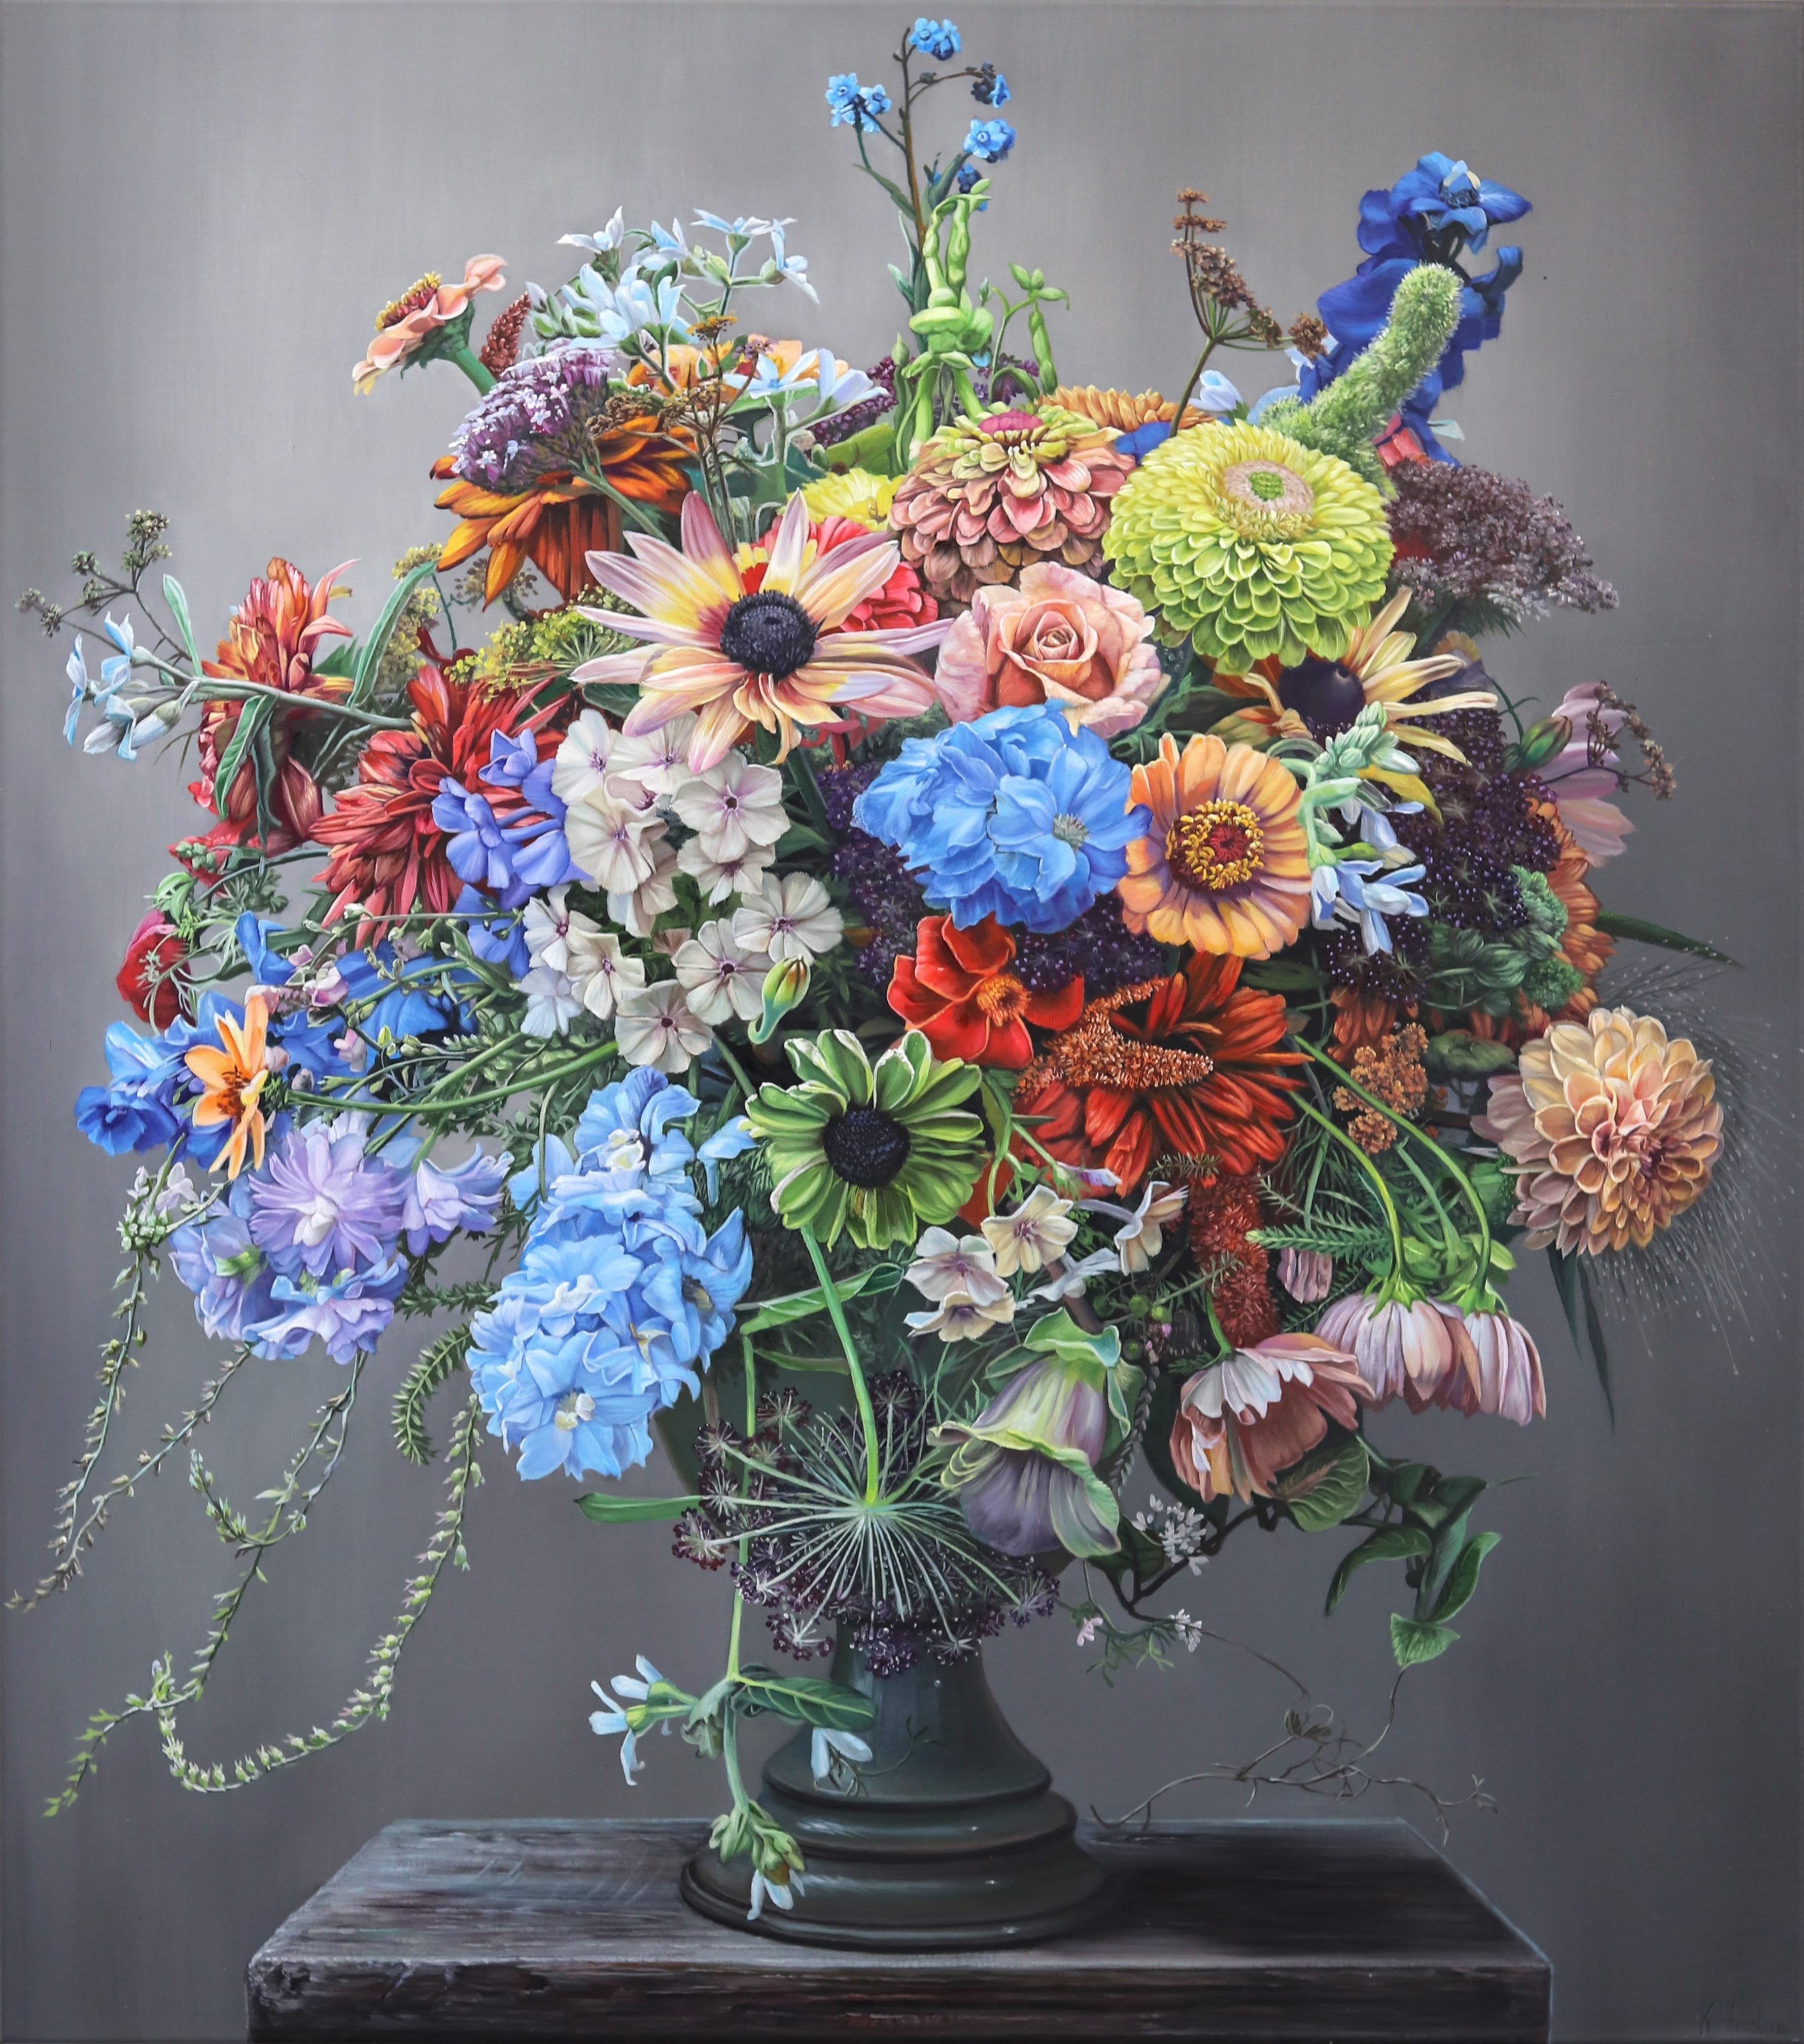 Katharina Husslein Figurative Painting - Touching Souls - Hyperrealist Floral Still Life Oil Painting